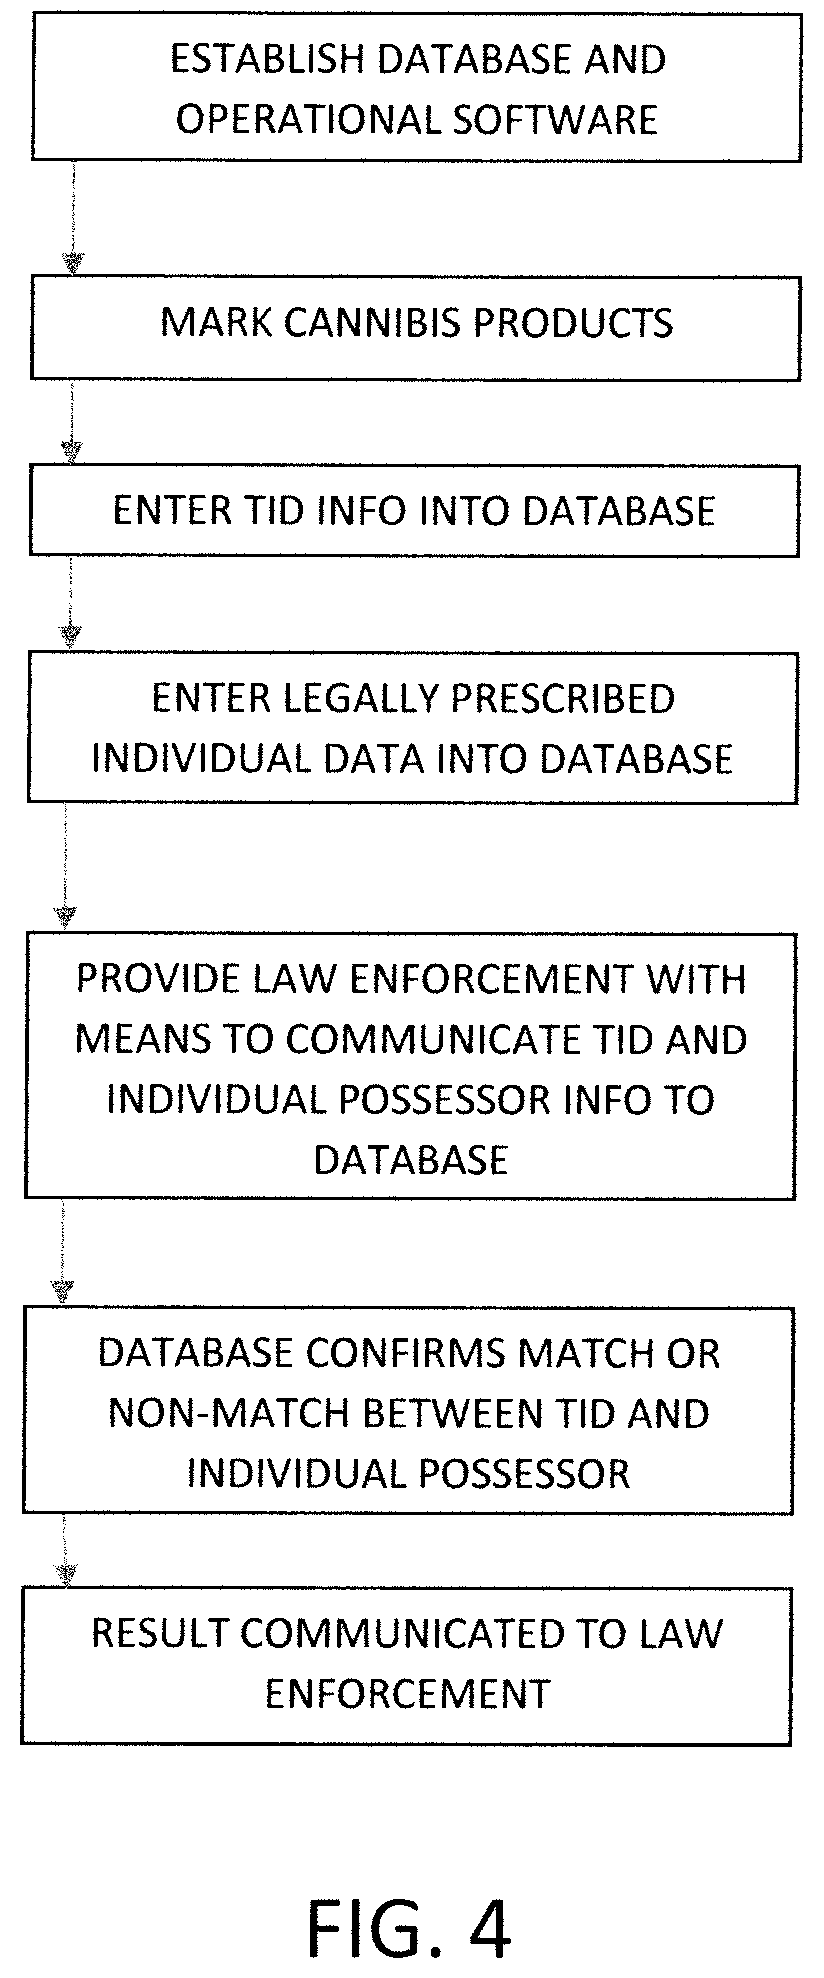 System, Method and Device for Registration and Identification of Prescribed and Legally Dispensed Cannabis Products